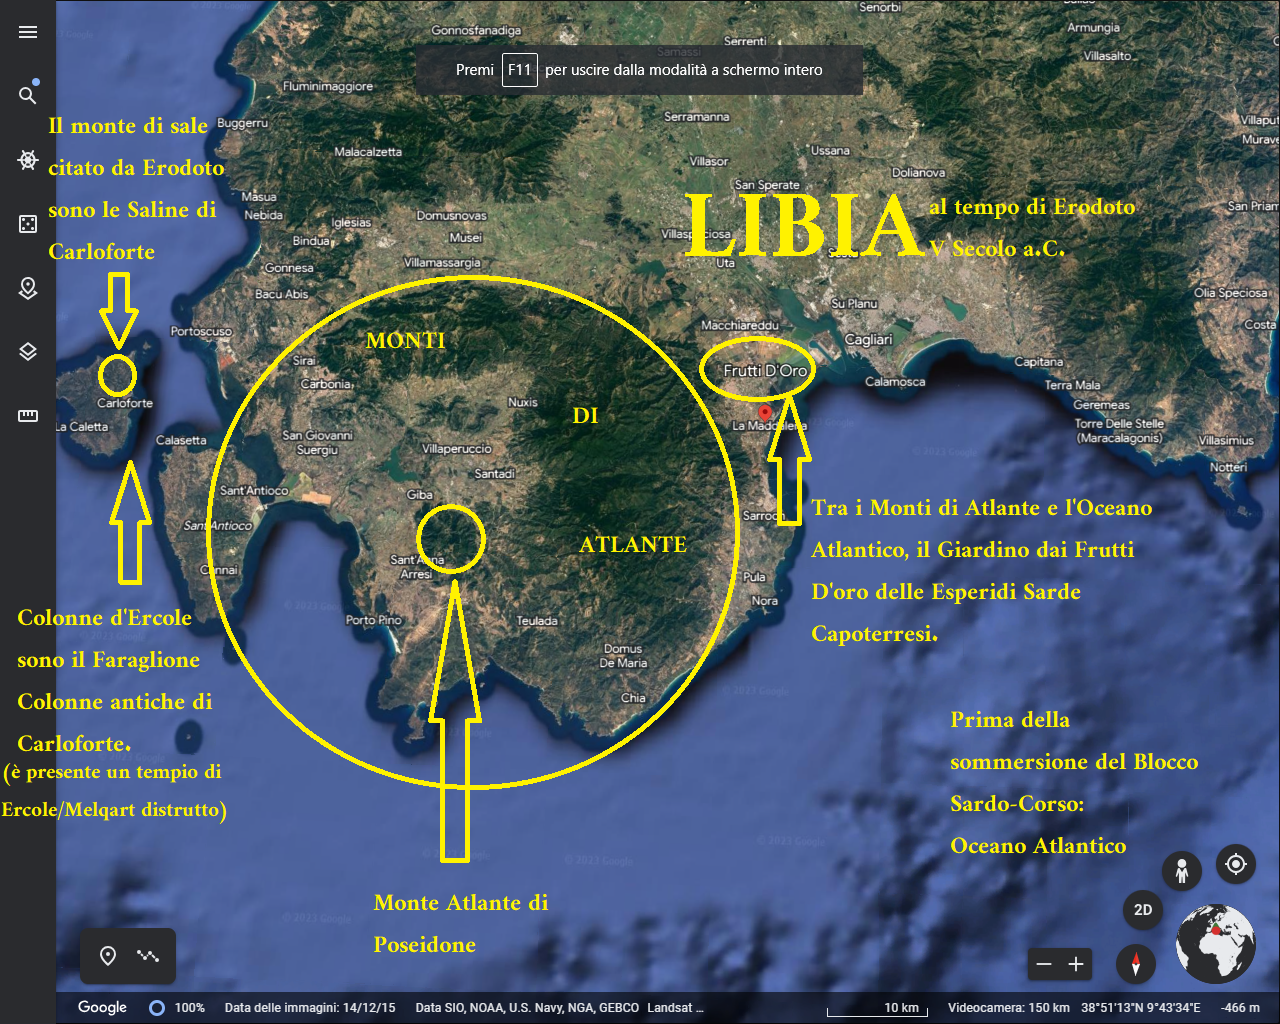 Until today the cartography of Herodotean Libya has been wrong: Libya is the province of Cagliari